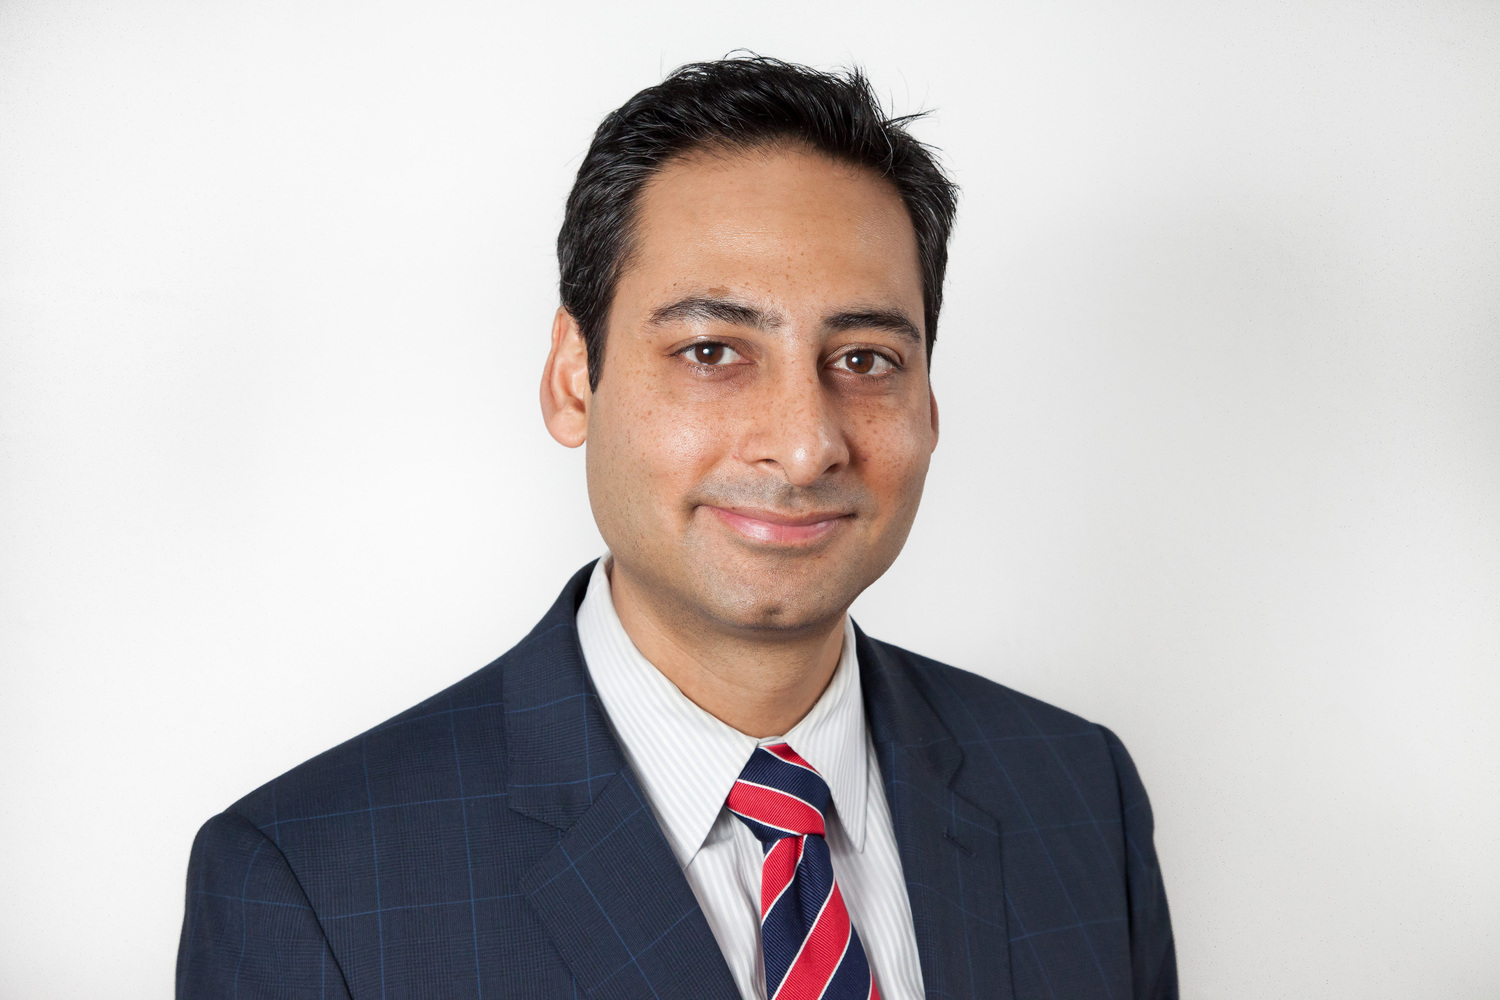 Gallery Photo of Dr. Sandip Buch, M.D., Founder